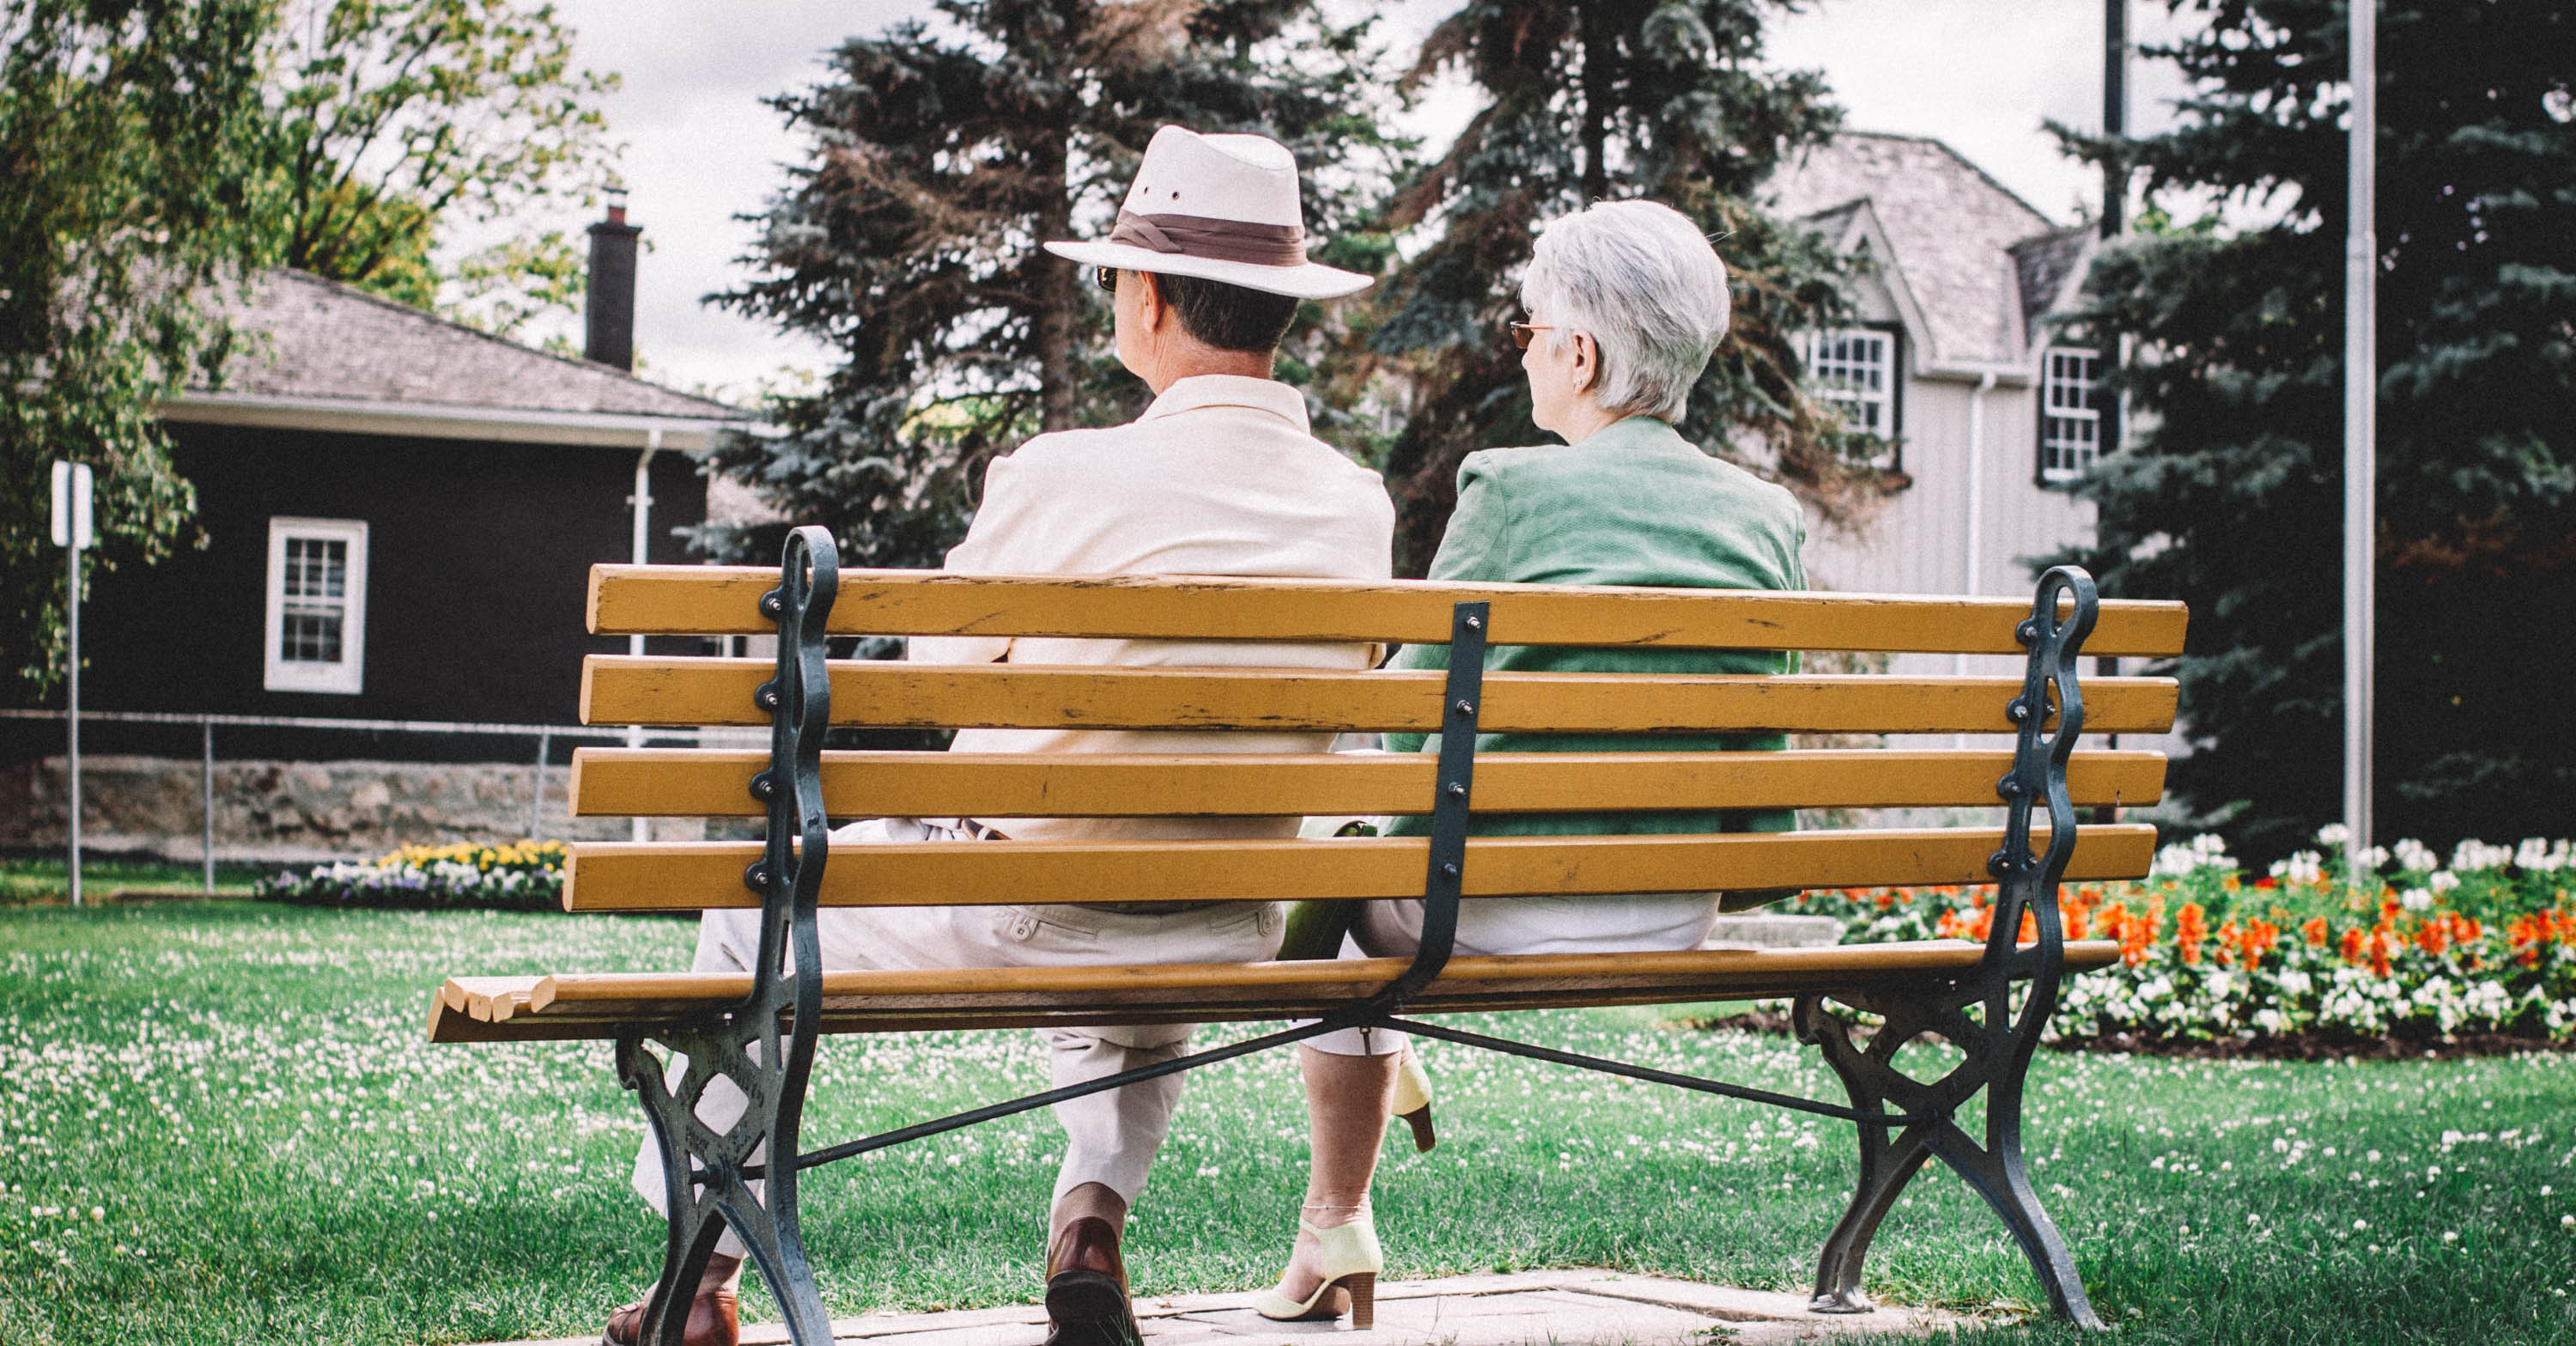 Two older adults sit on a bench in a park.